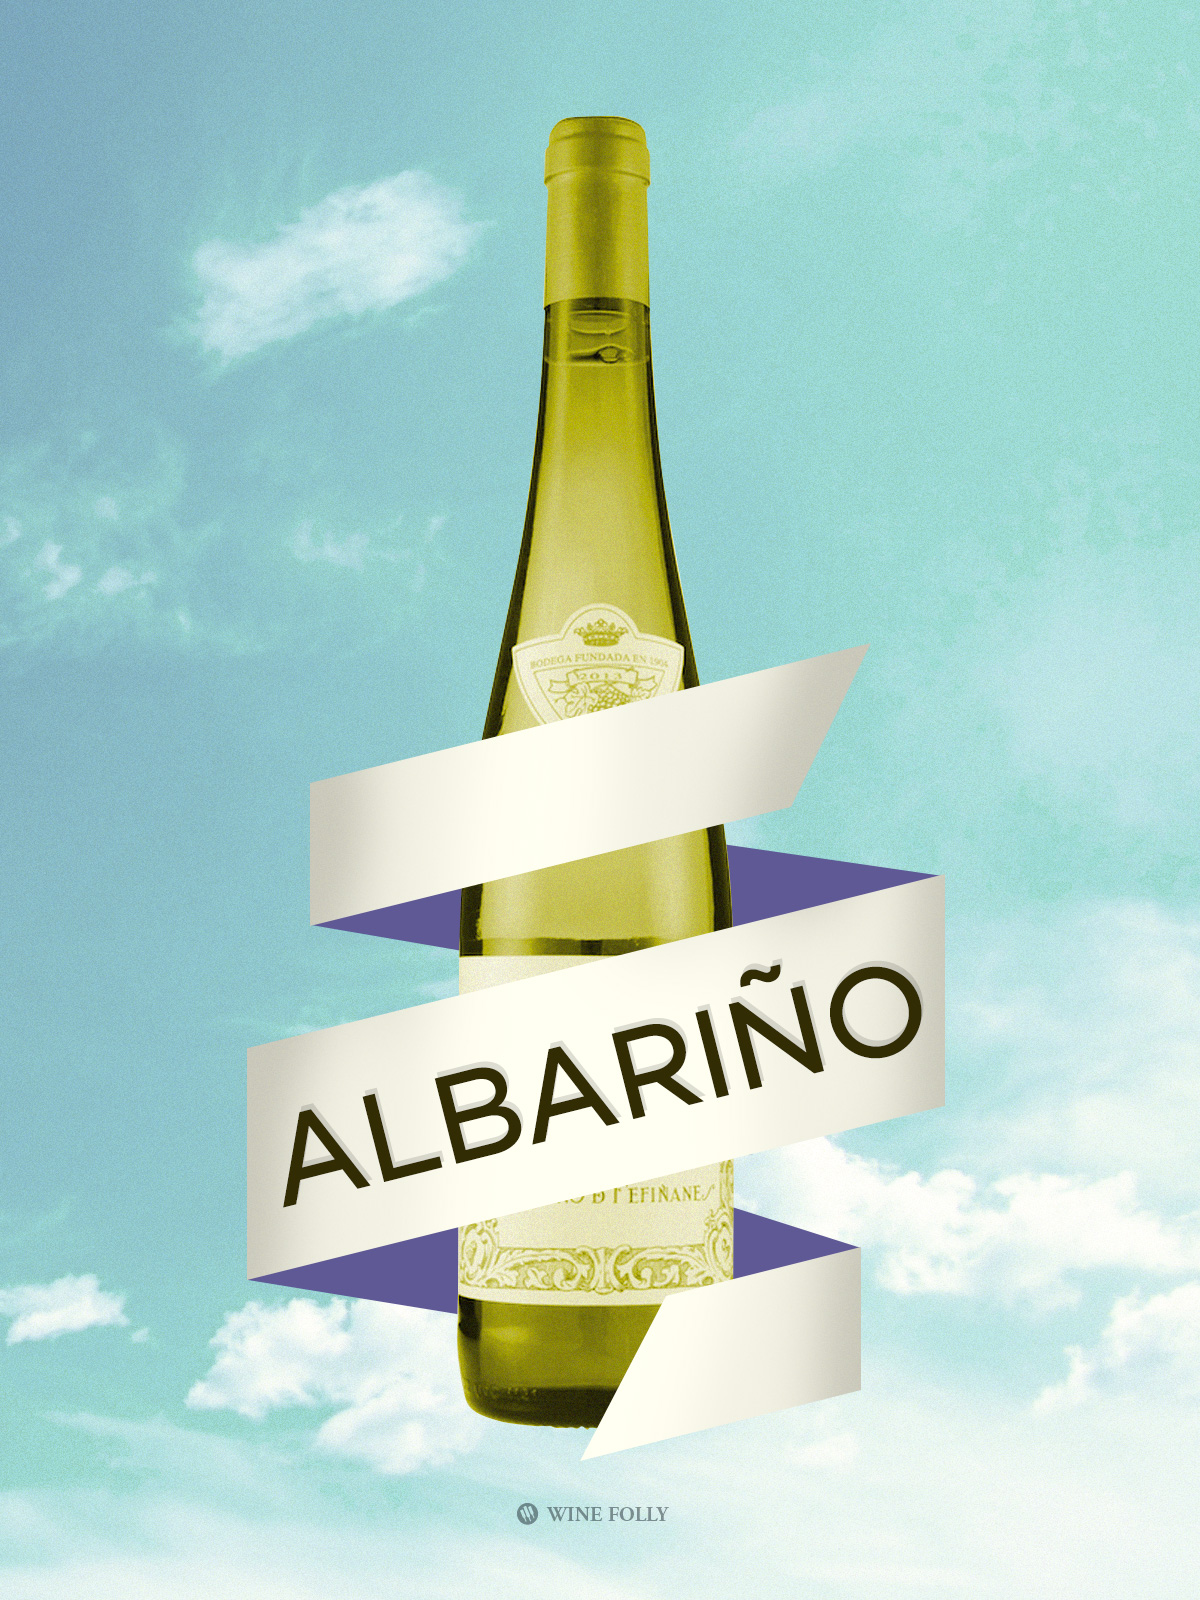 Albariño wine from Spain illustration by Wine Folly